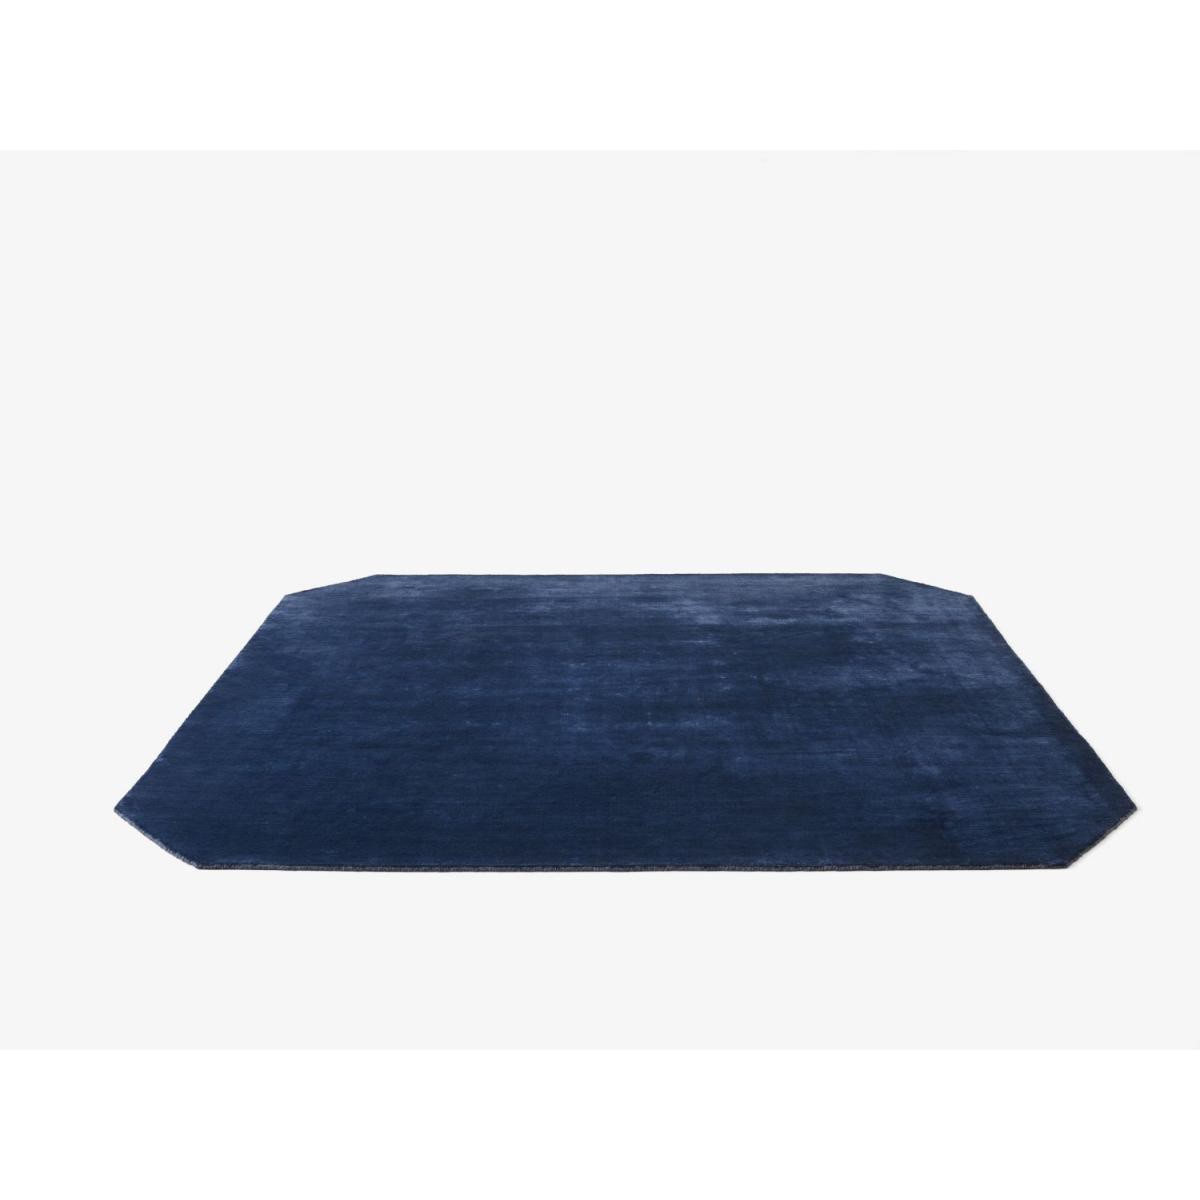 Andtradition - Tapis The Moor - 300 x 300 cm - bleu nuit - Tapis